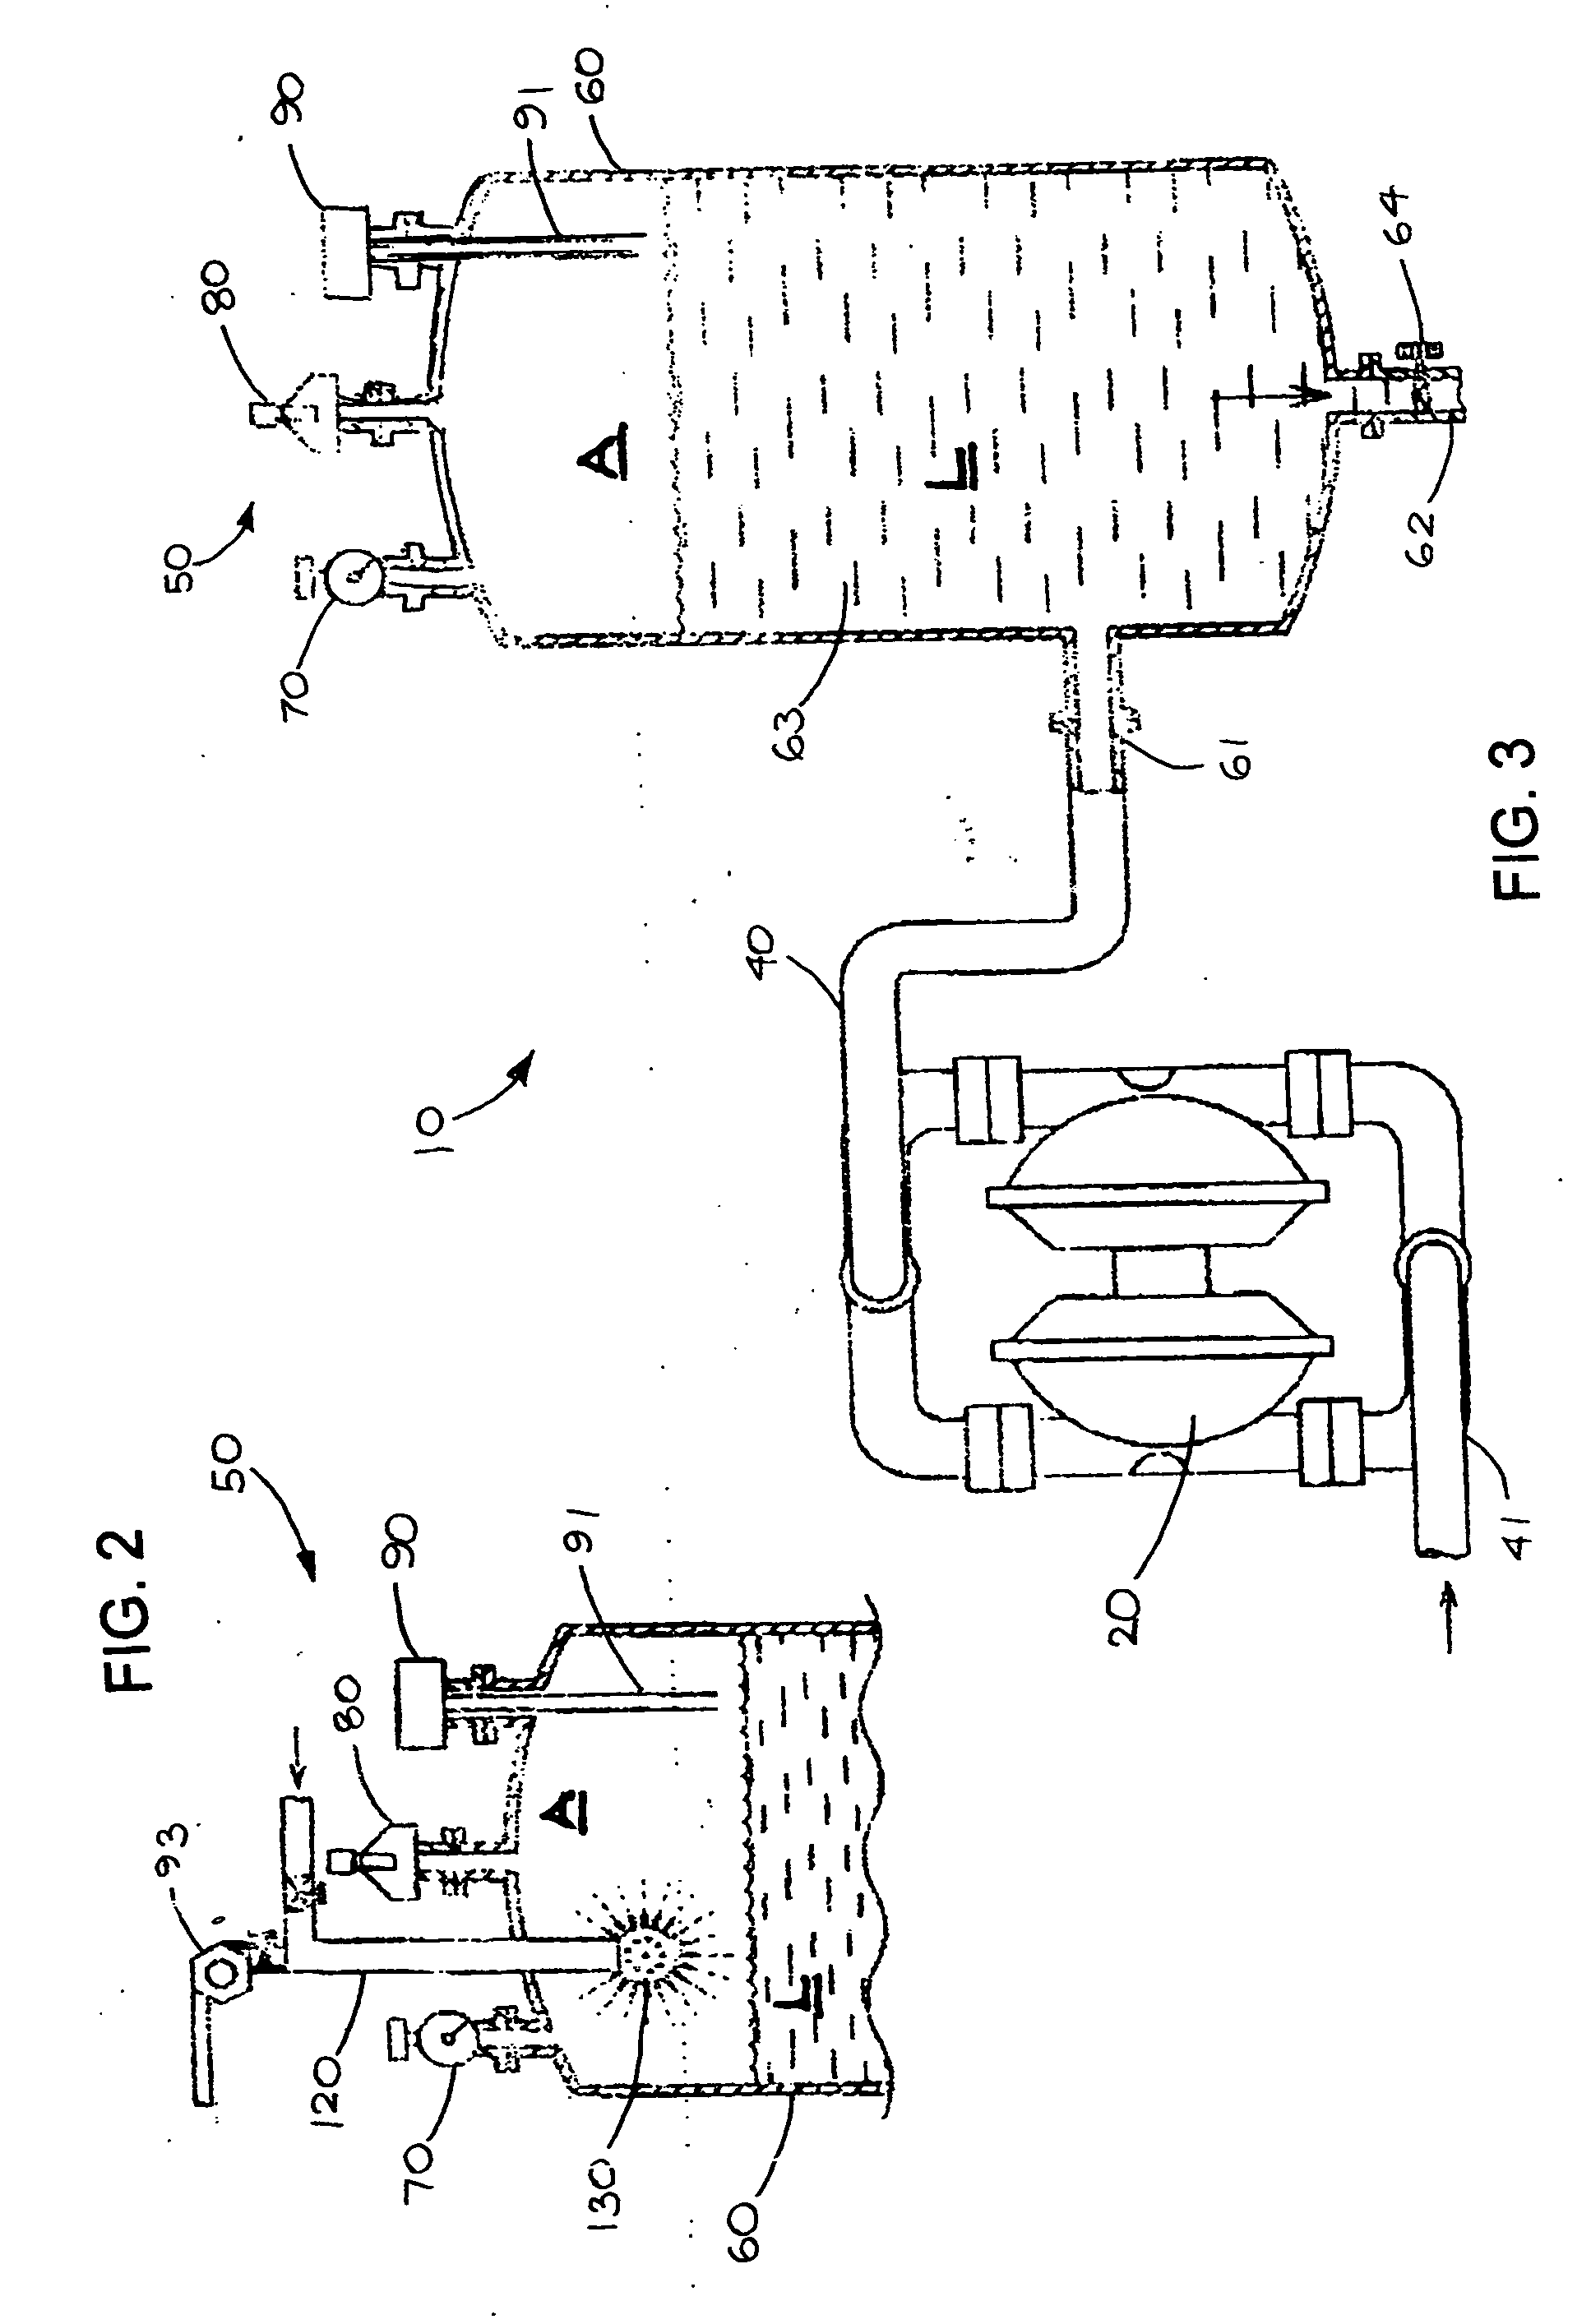 Pump pulsation dampening attachment and method for dampening pump pulsations